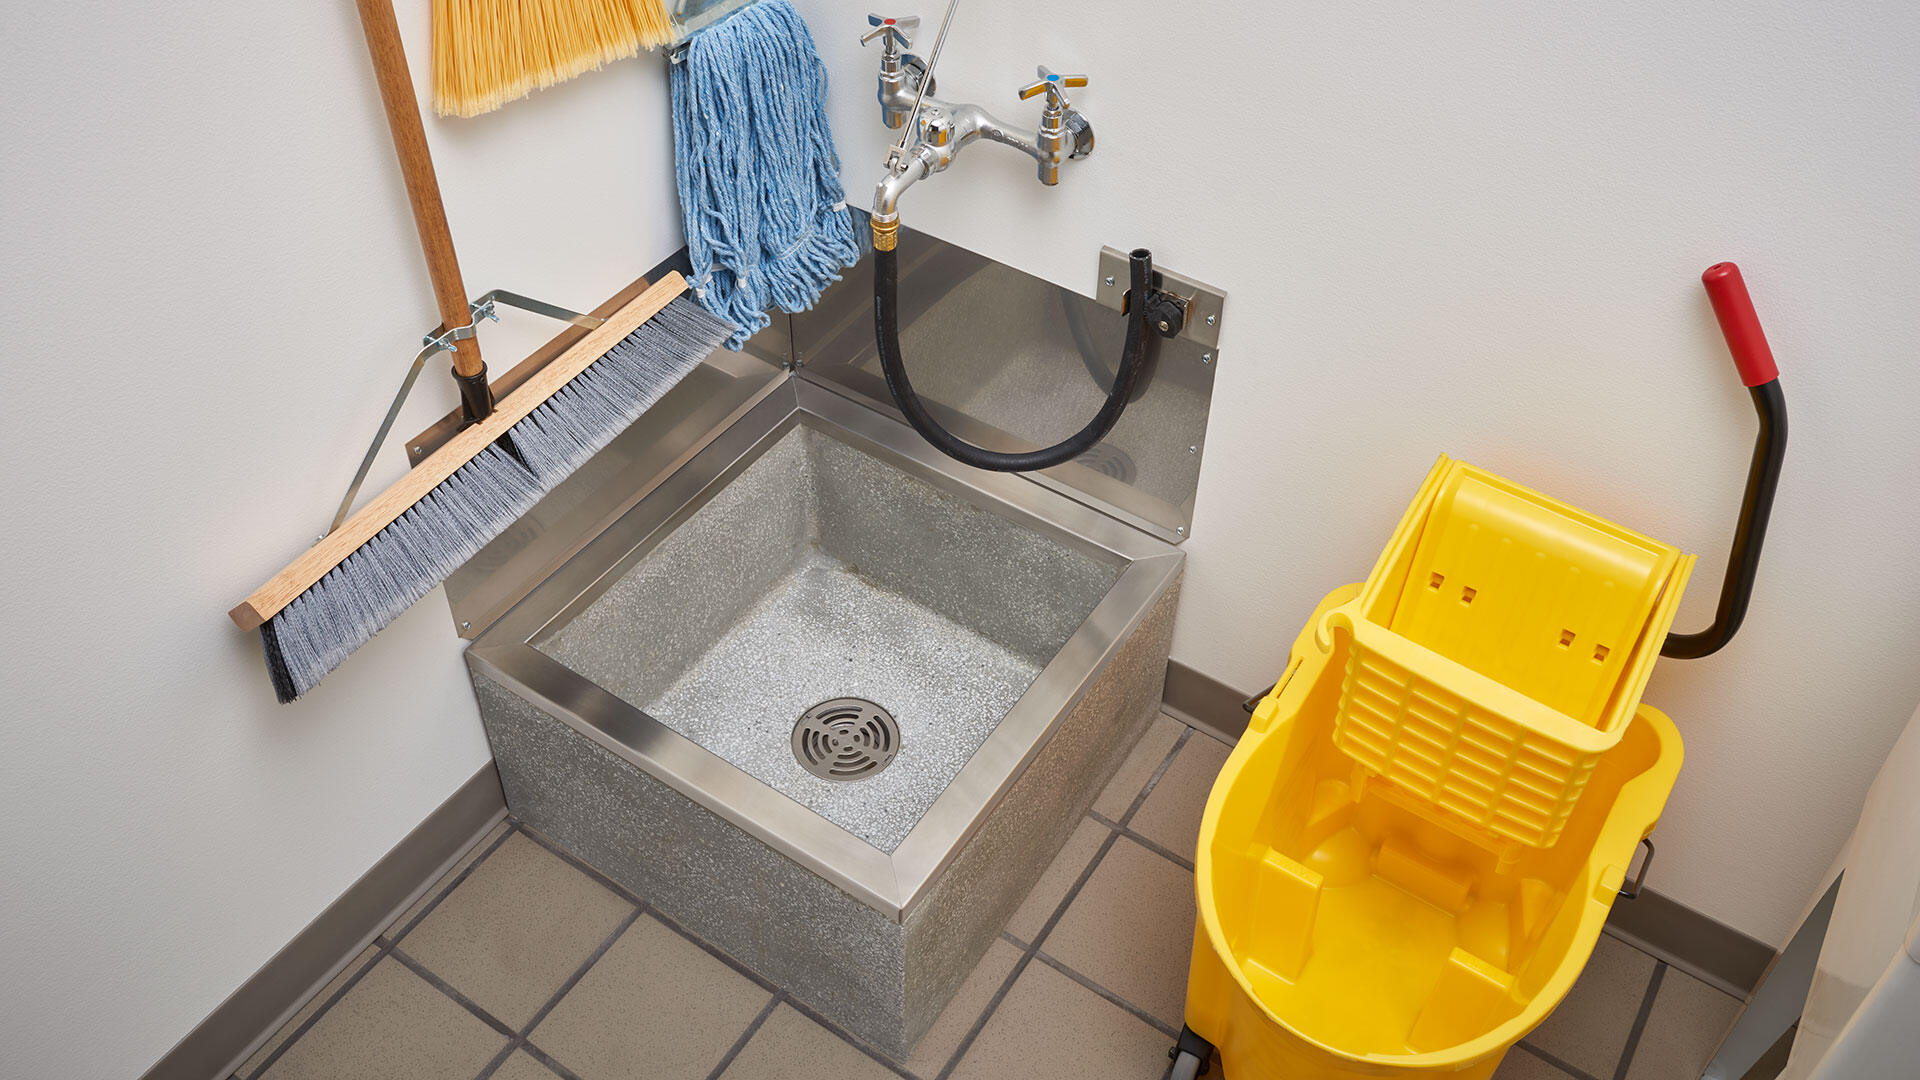 What Is A Service Sink Used For